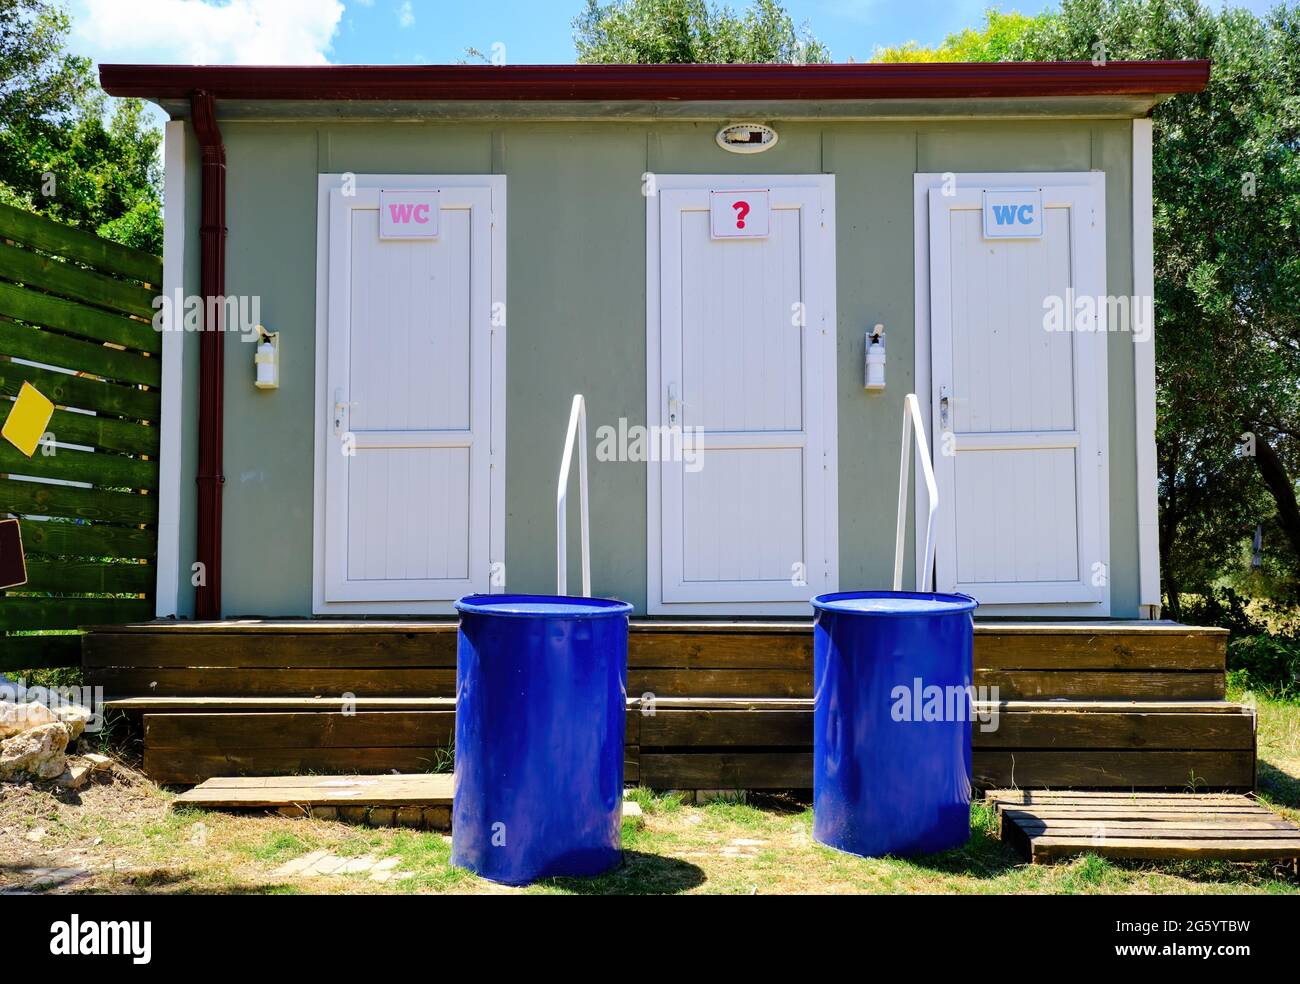 Prefabricated portable toilet cabin exterior with three doors for men, women and a question mark for various gender identity. Stock Photo